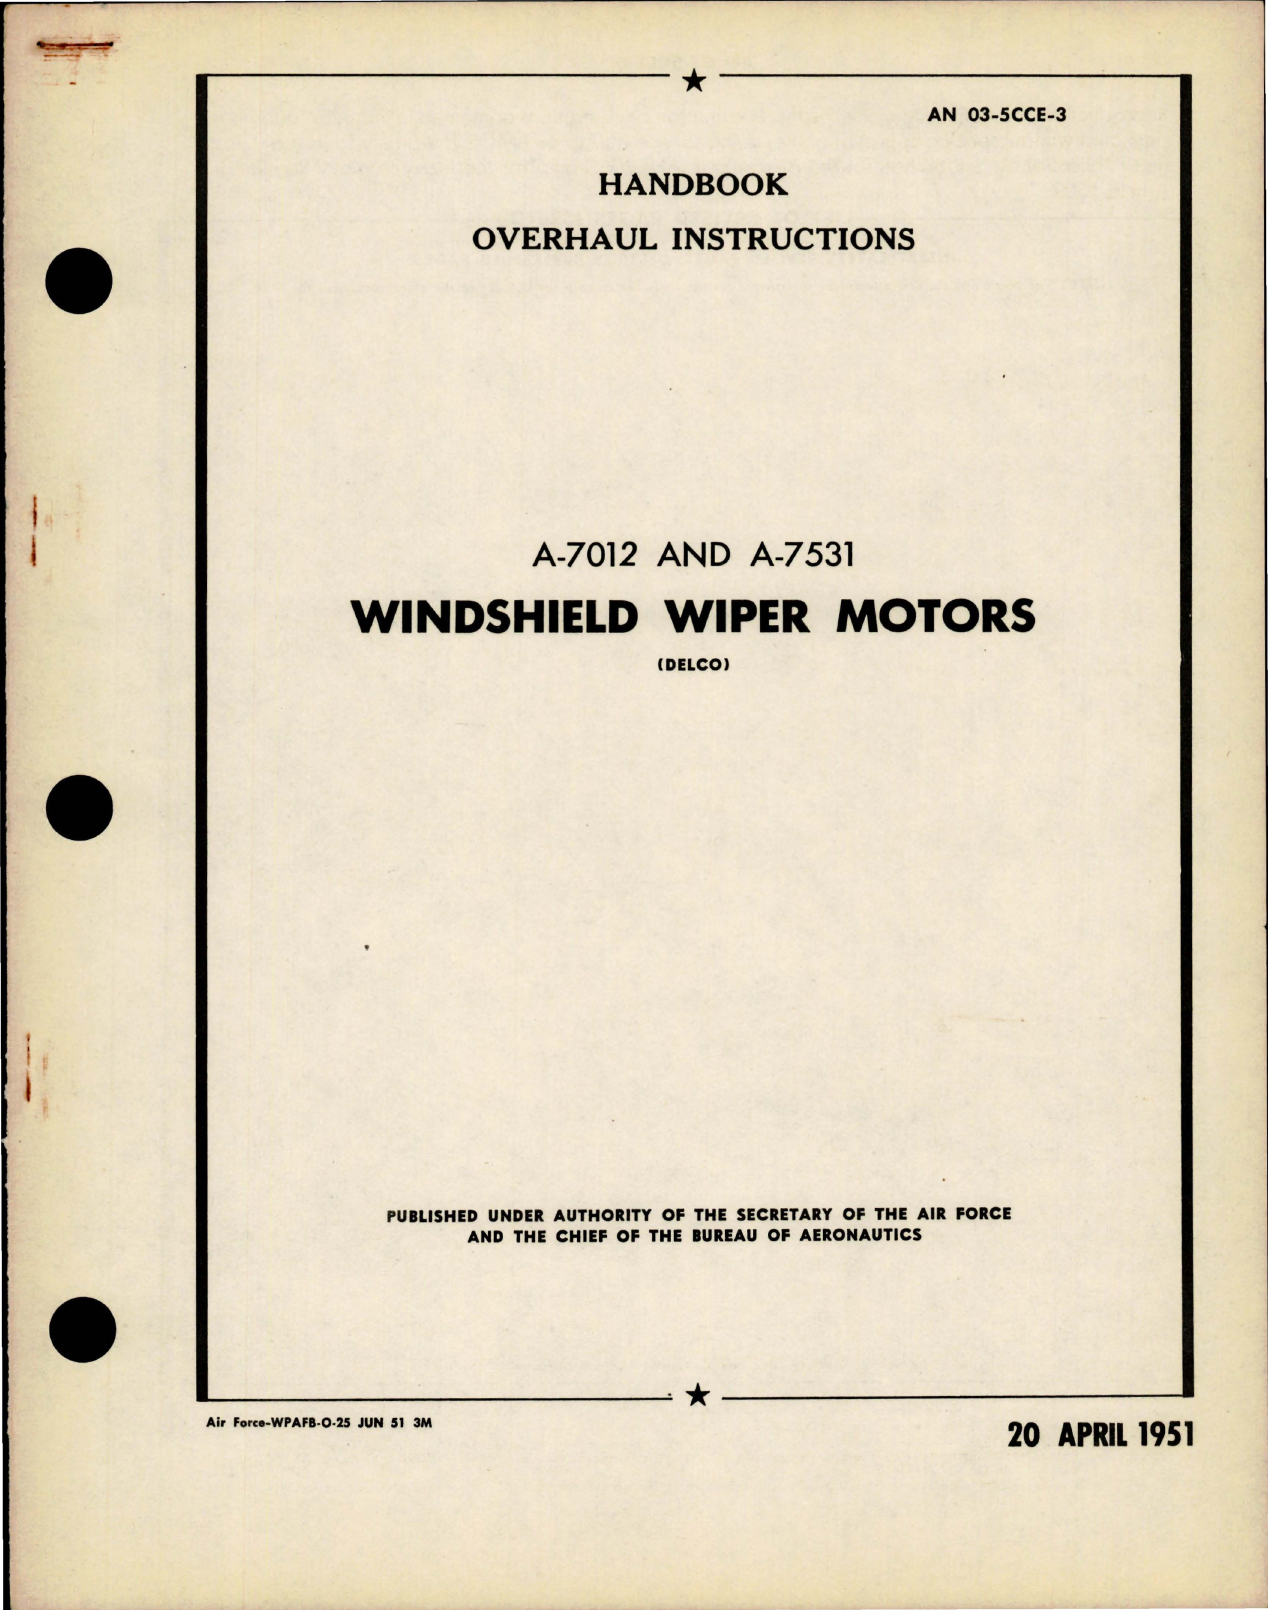 Sample page 1 from AirCorps Library document: Overhaul Instructions for Windshield Wiper Motors - A-7012 and A-7531